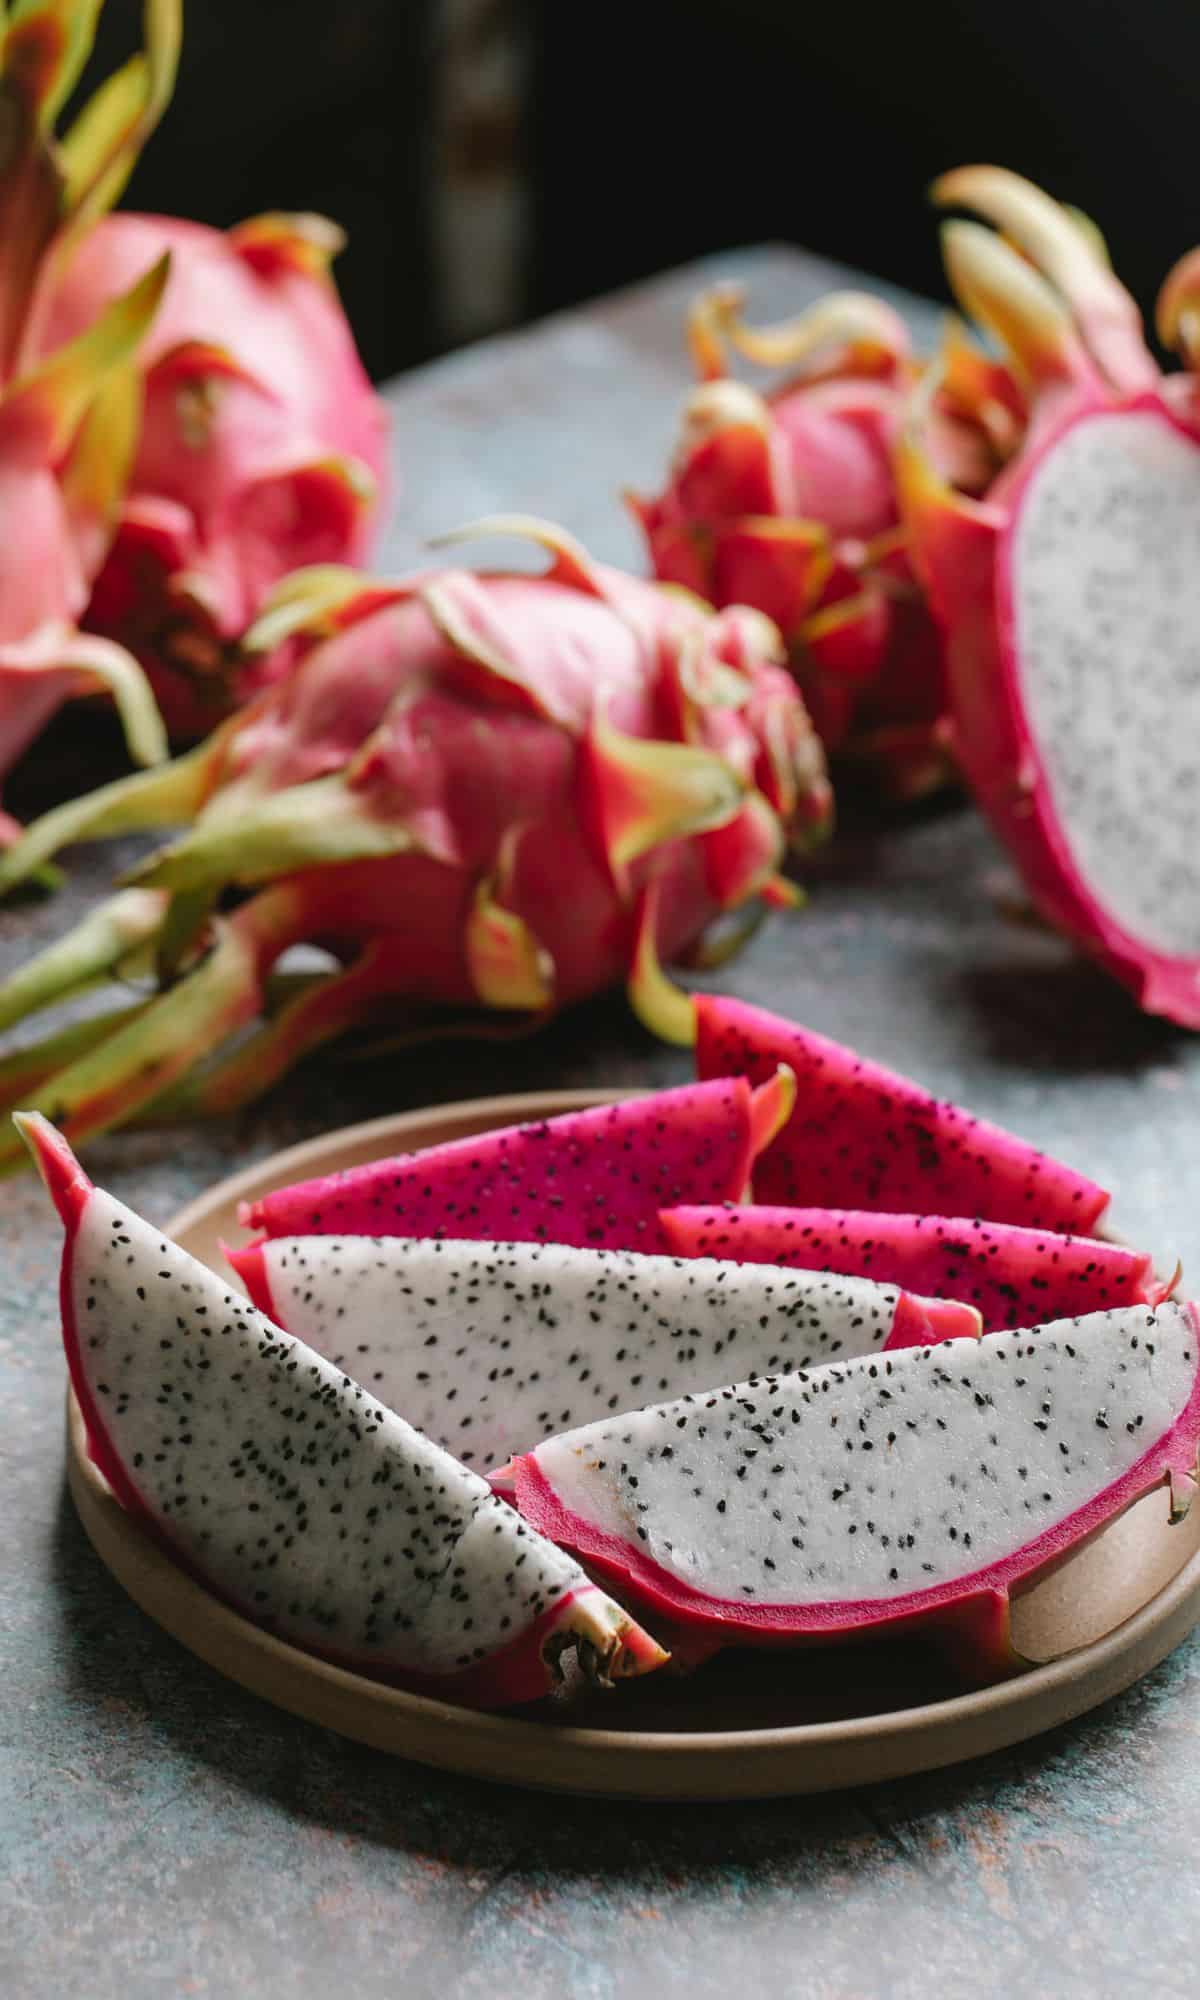 one of the best asian fruits, dragon fruit, sliced and on a brown plate.